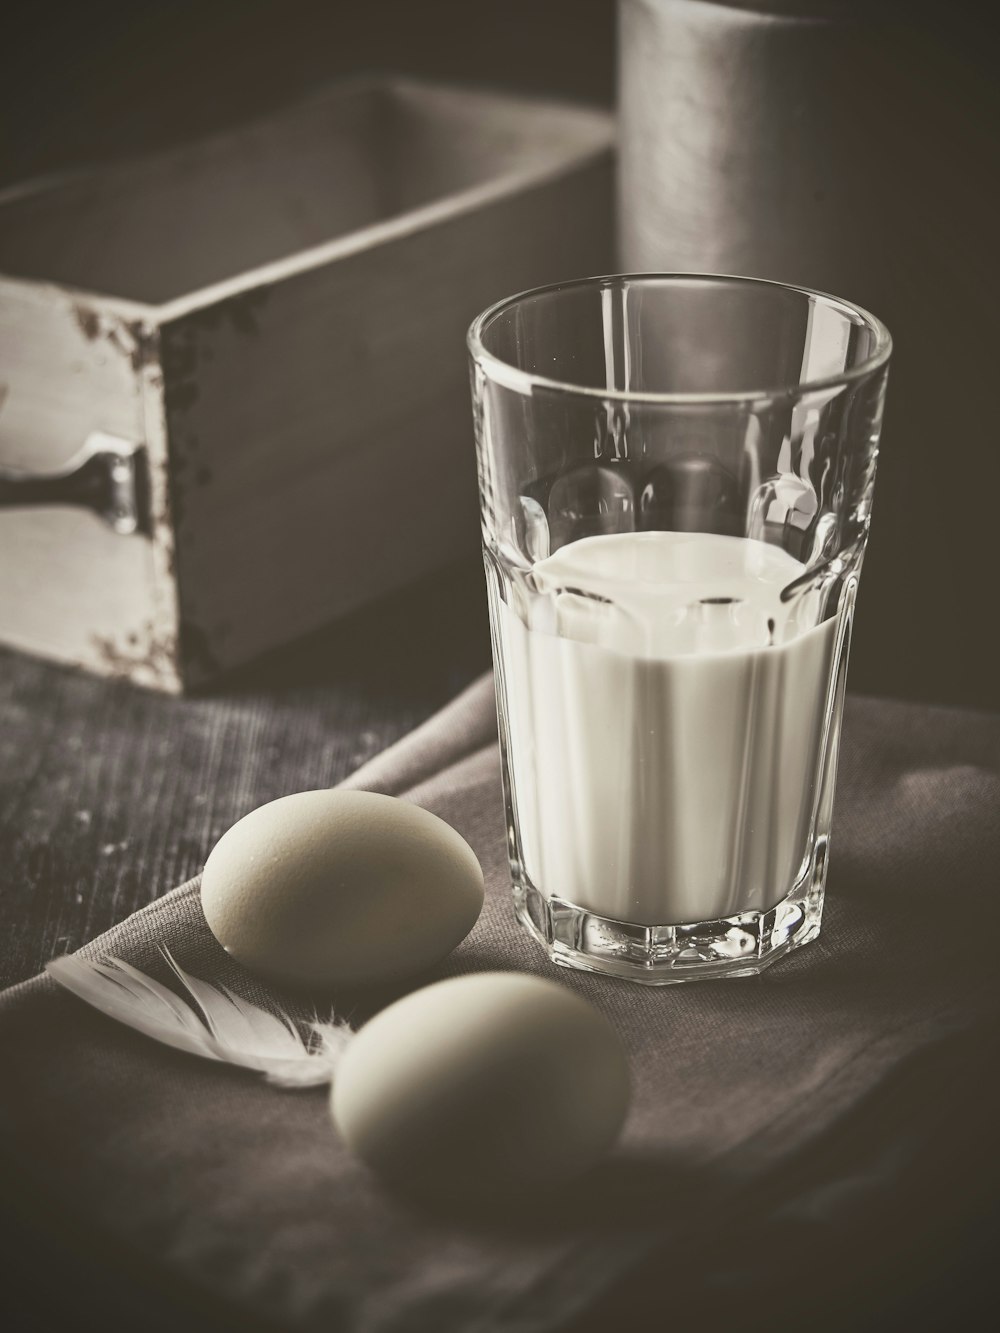 two organic eggs and glass of milk on textile